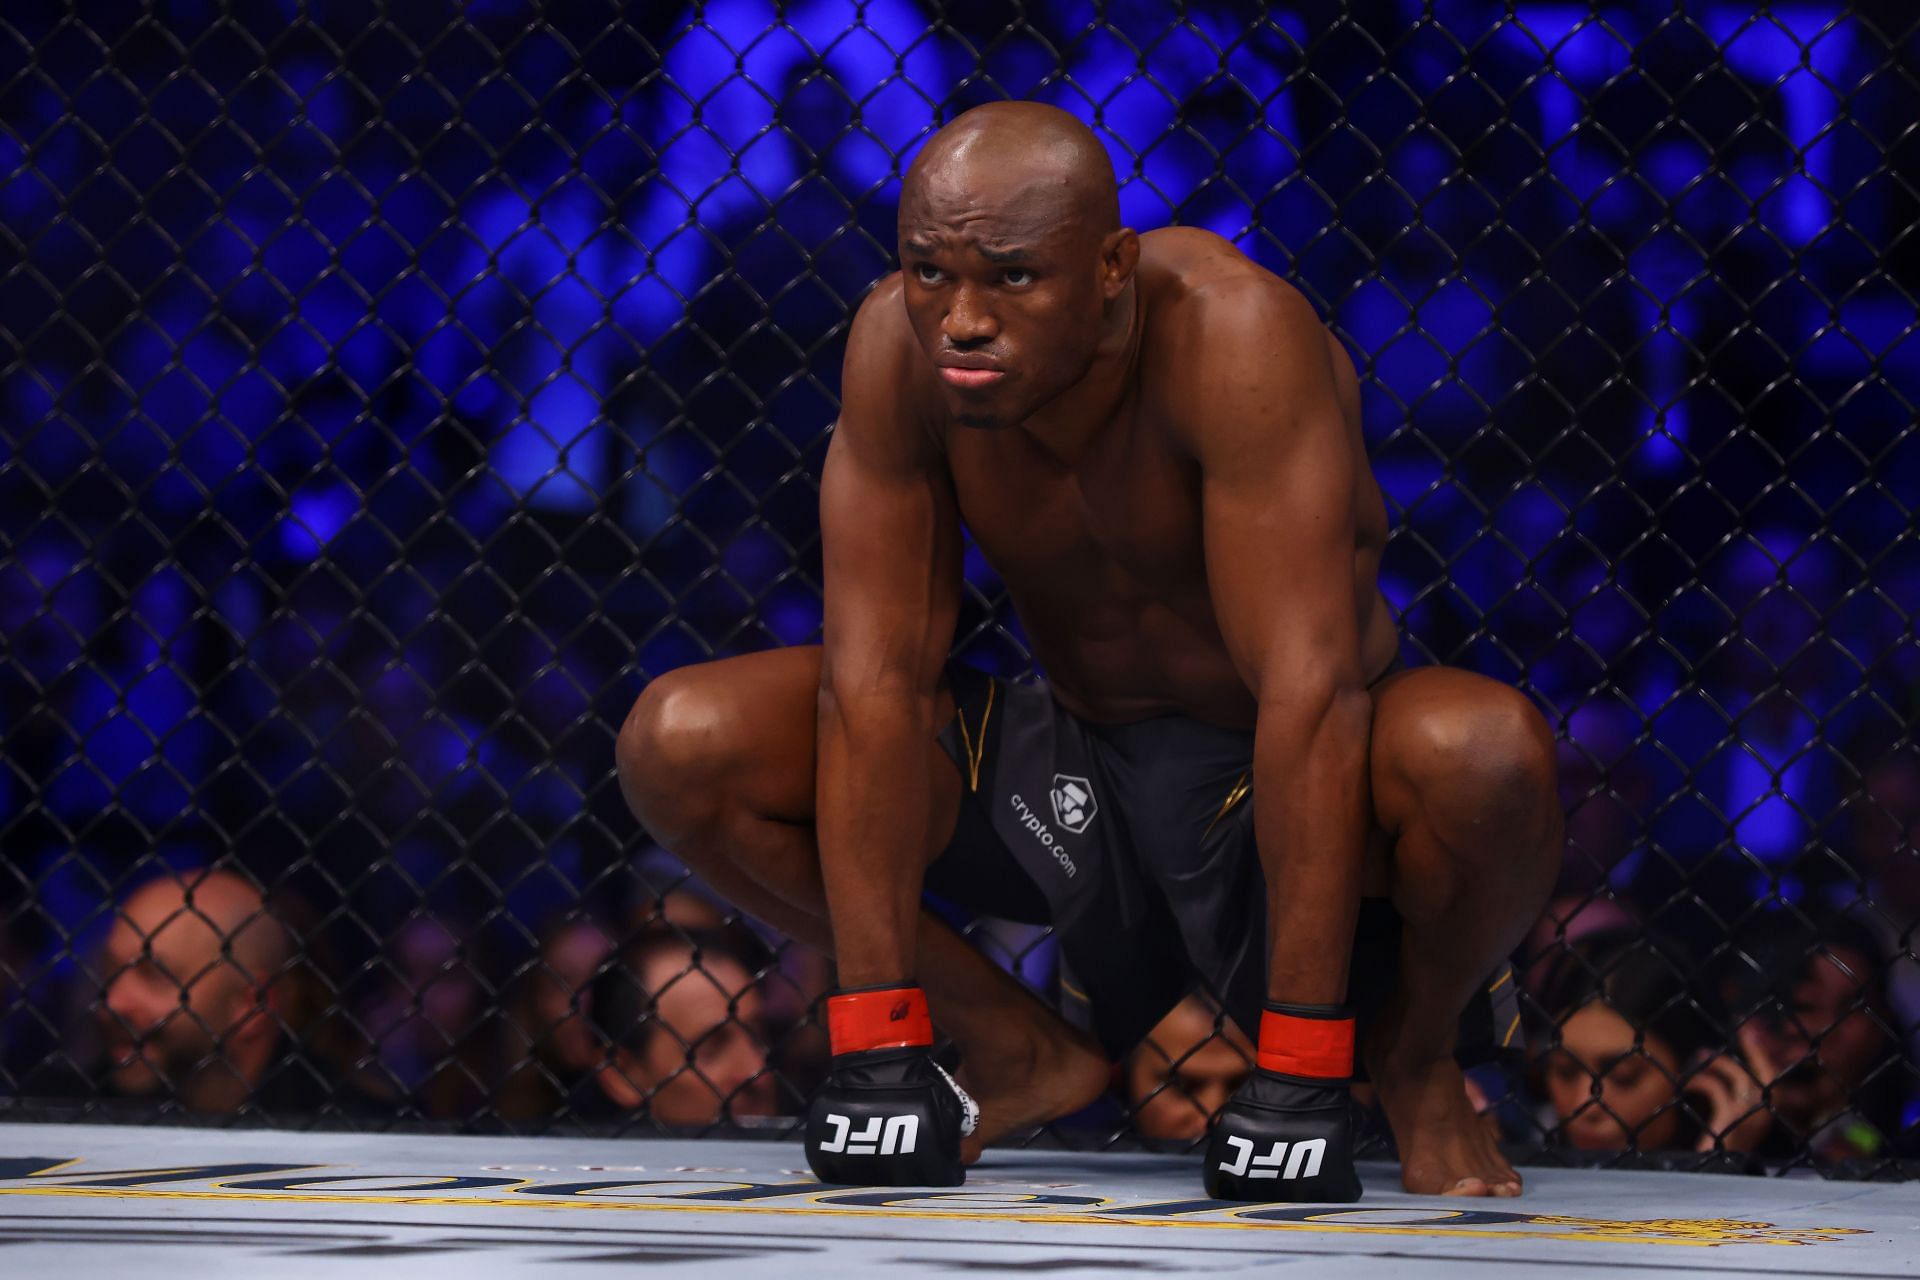 Current welterweight champ Kamaru Usman has five successful title defenses to his name